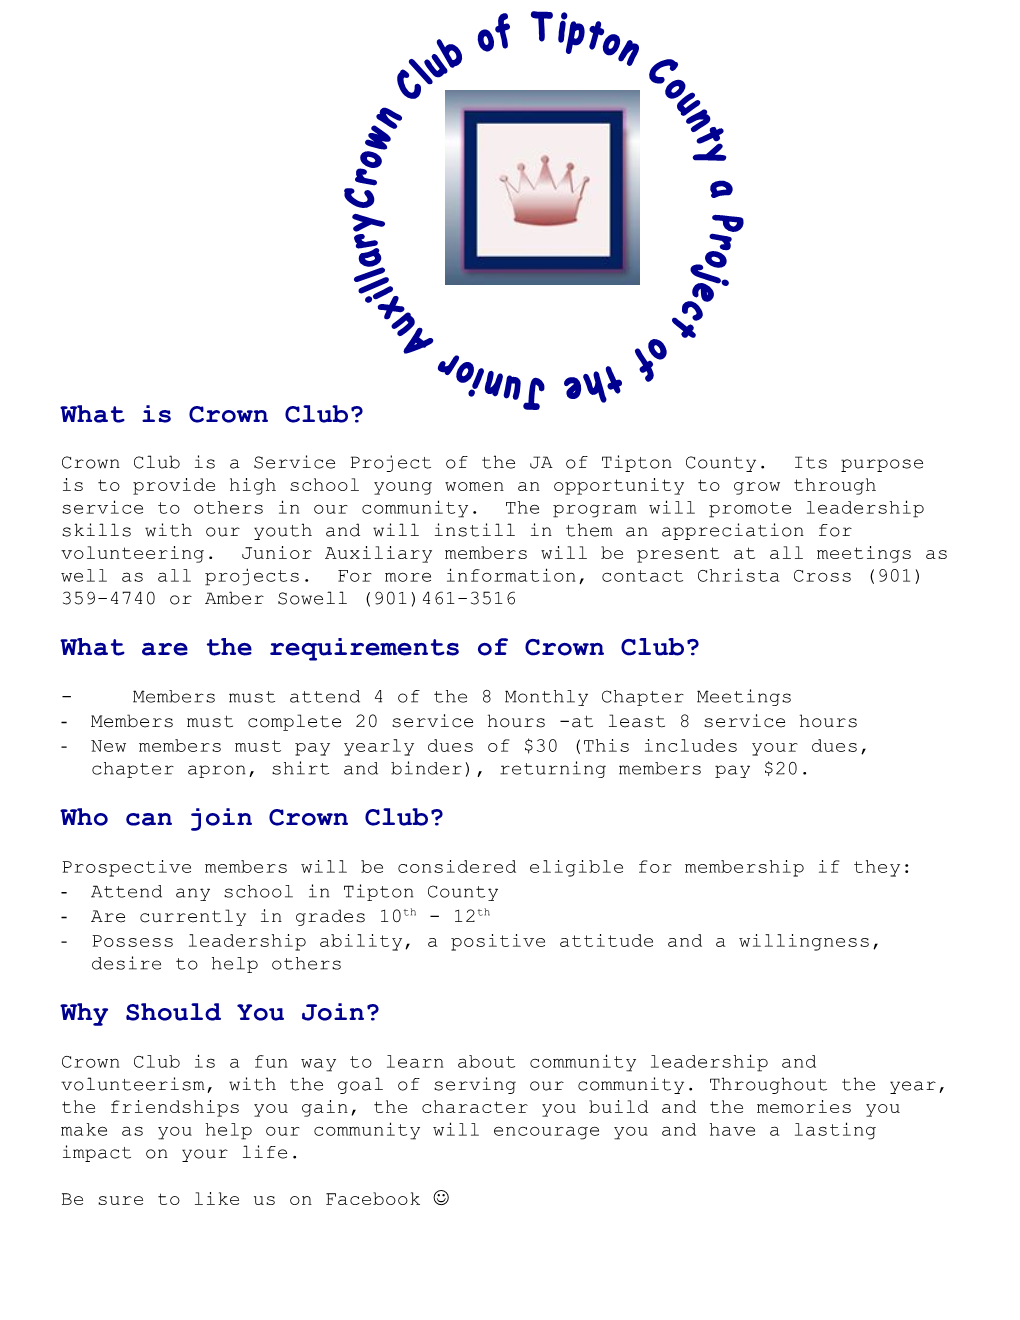 What Are the Requirements of Crown Club?